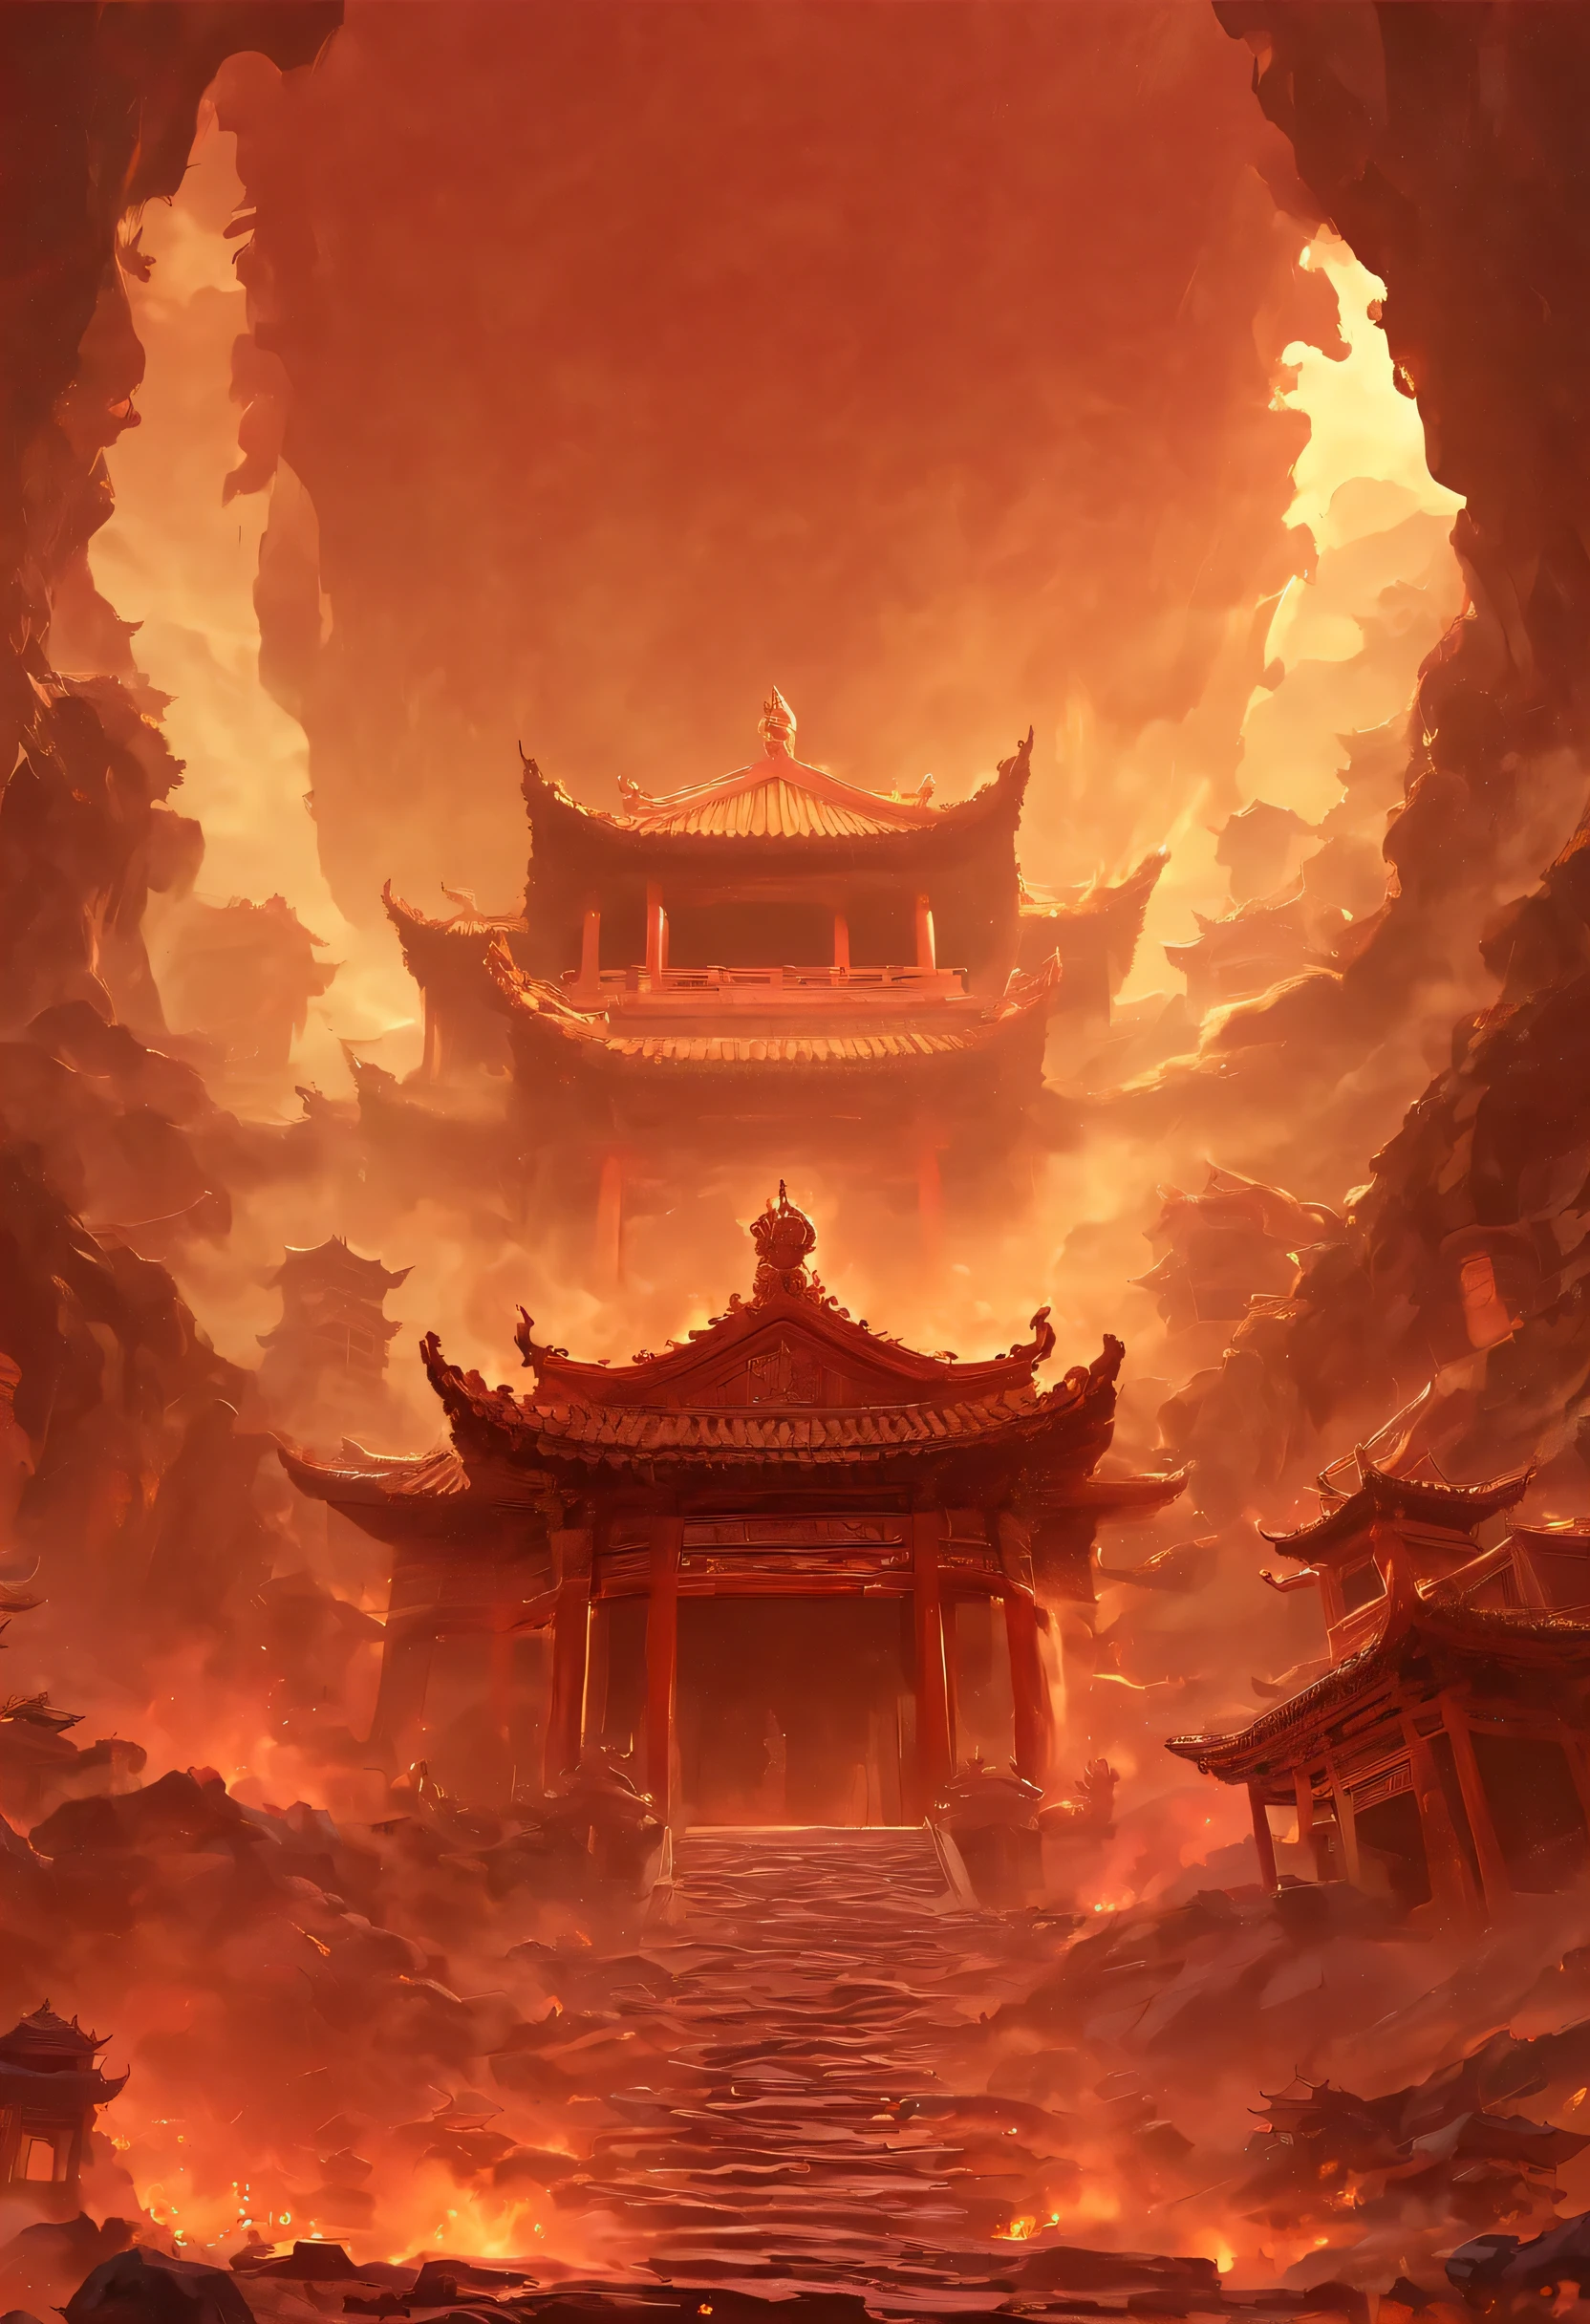 underground tomb：1.37.（（（神秘的东方underground tomb，underground tomb，Magnificent and spacious majestic landscape））），Red sedan suspended in the air，Chinese sedan，dim lights，intricately carved stone walls，The mysterious atmosphere is scary，Supernatural powers。
